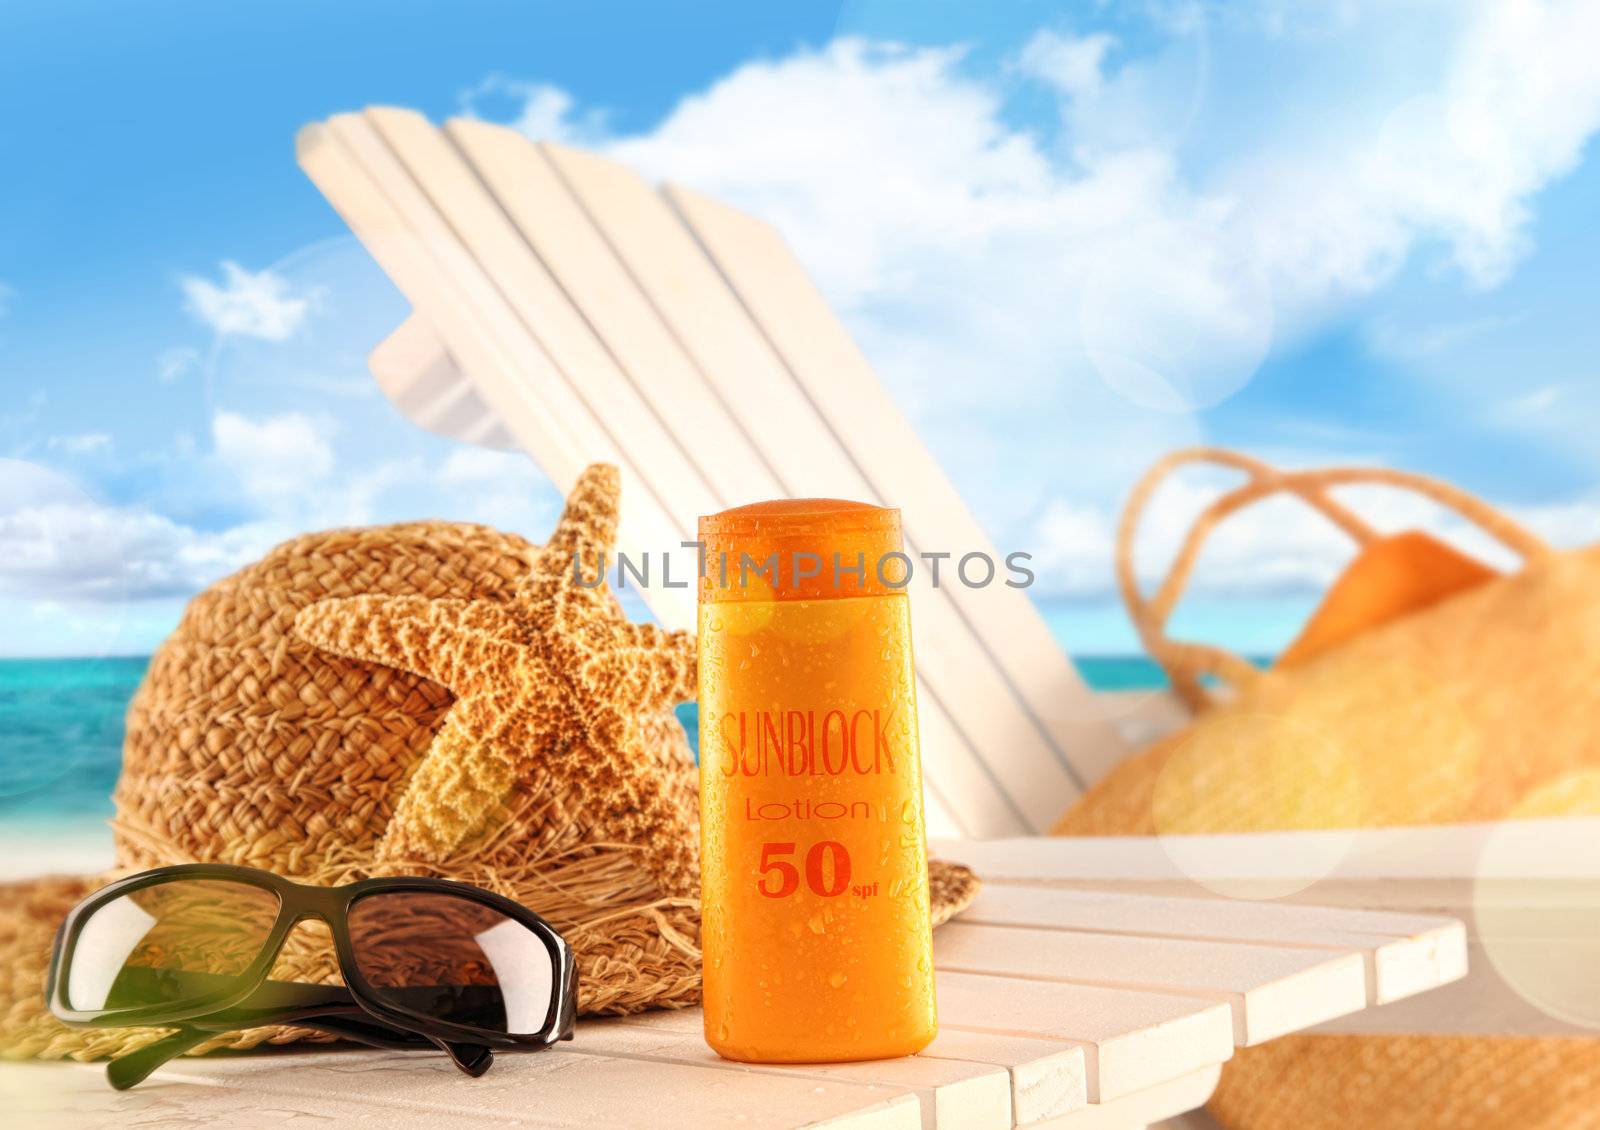 Sunblock lotion and beach items on table  by Sandralise